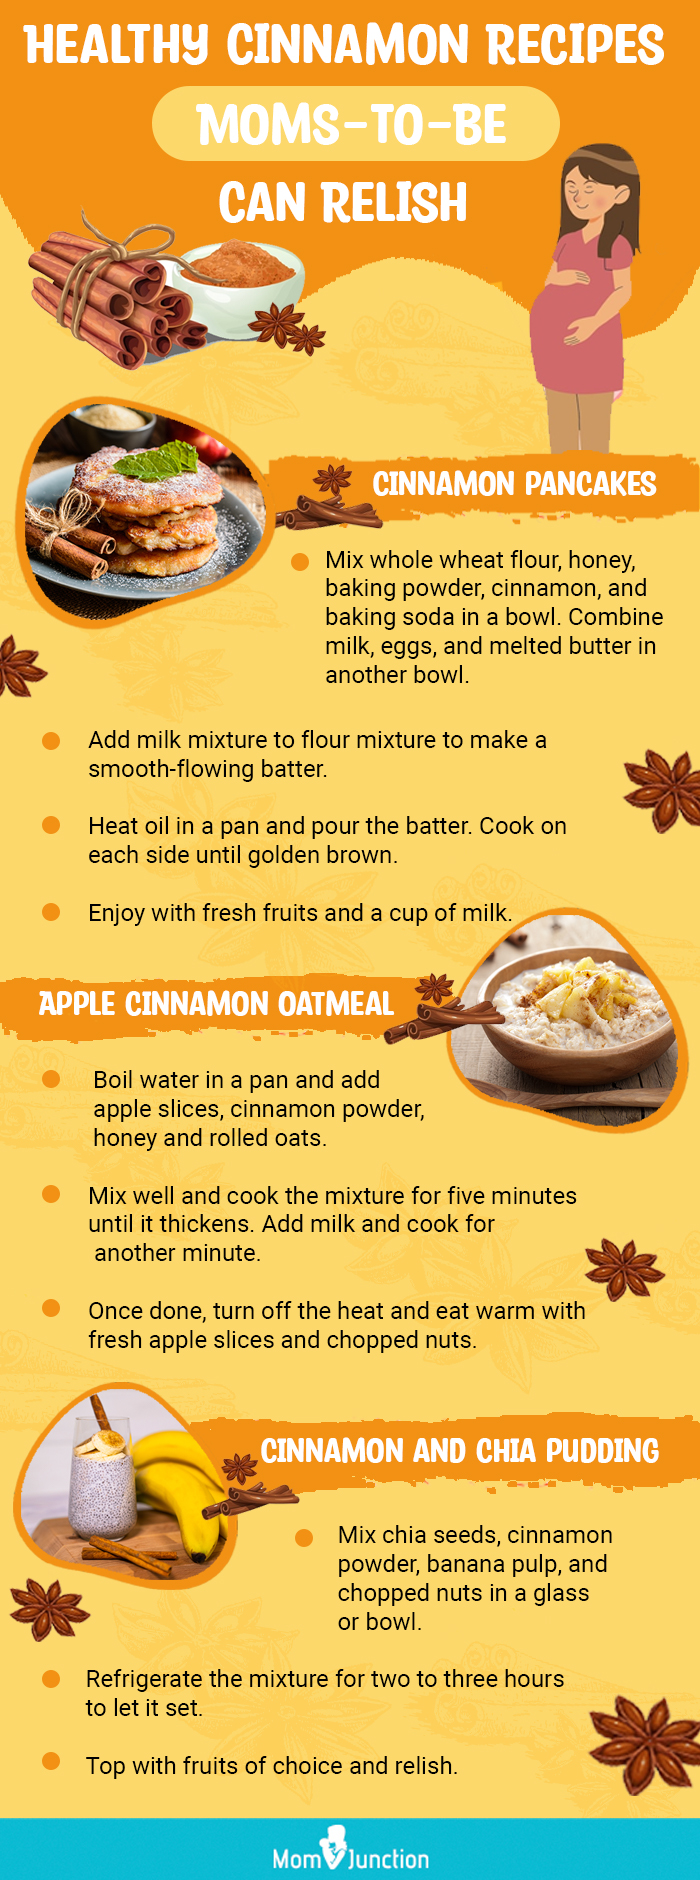 healthy cinnamon recipes moms to be an relish [infographic]